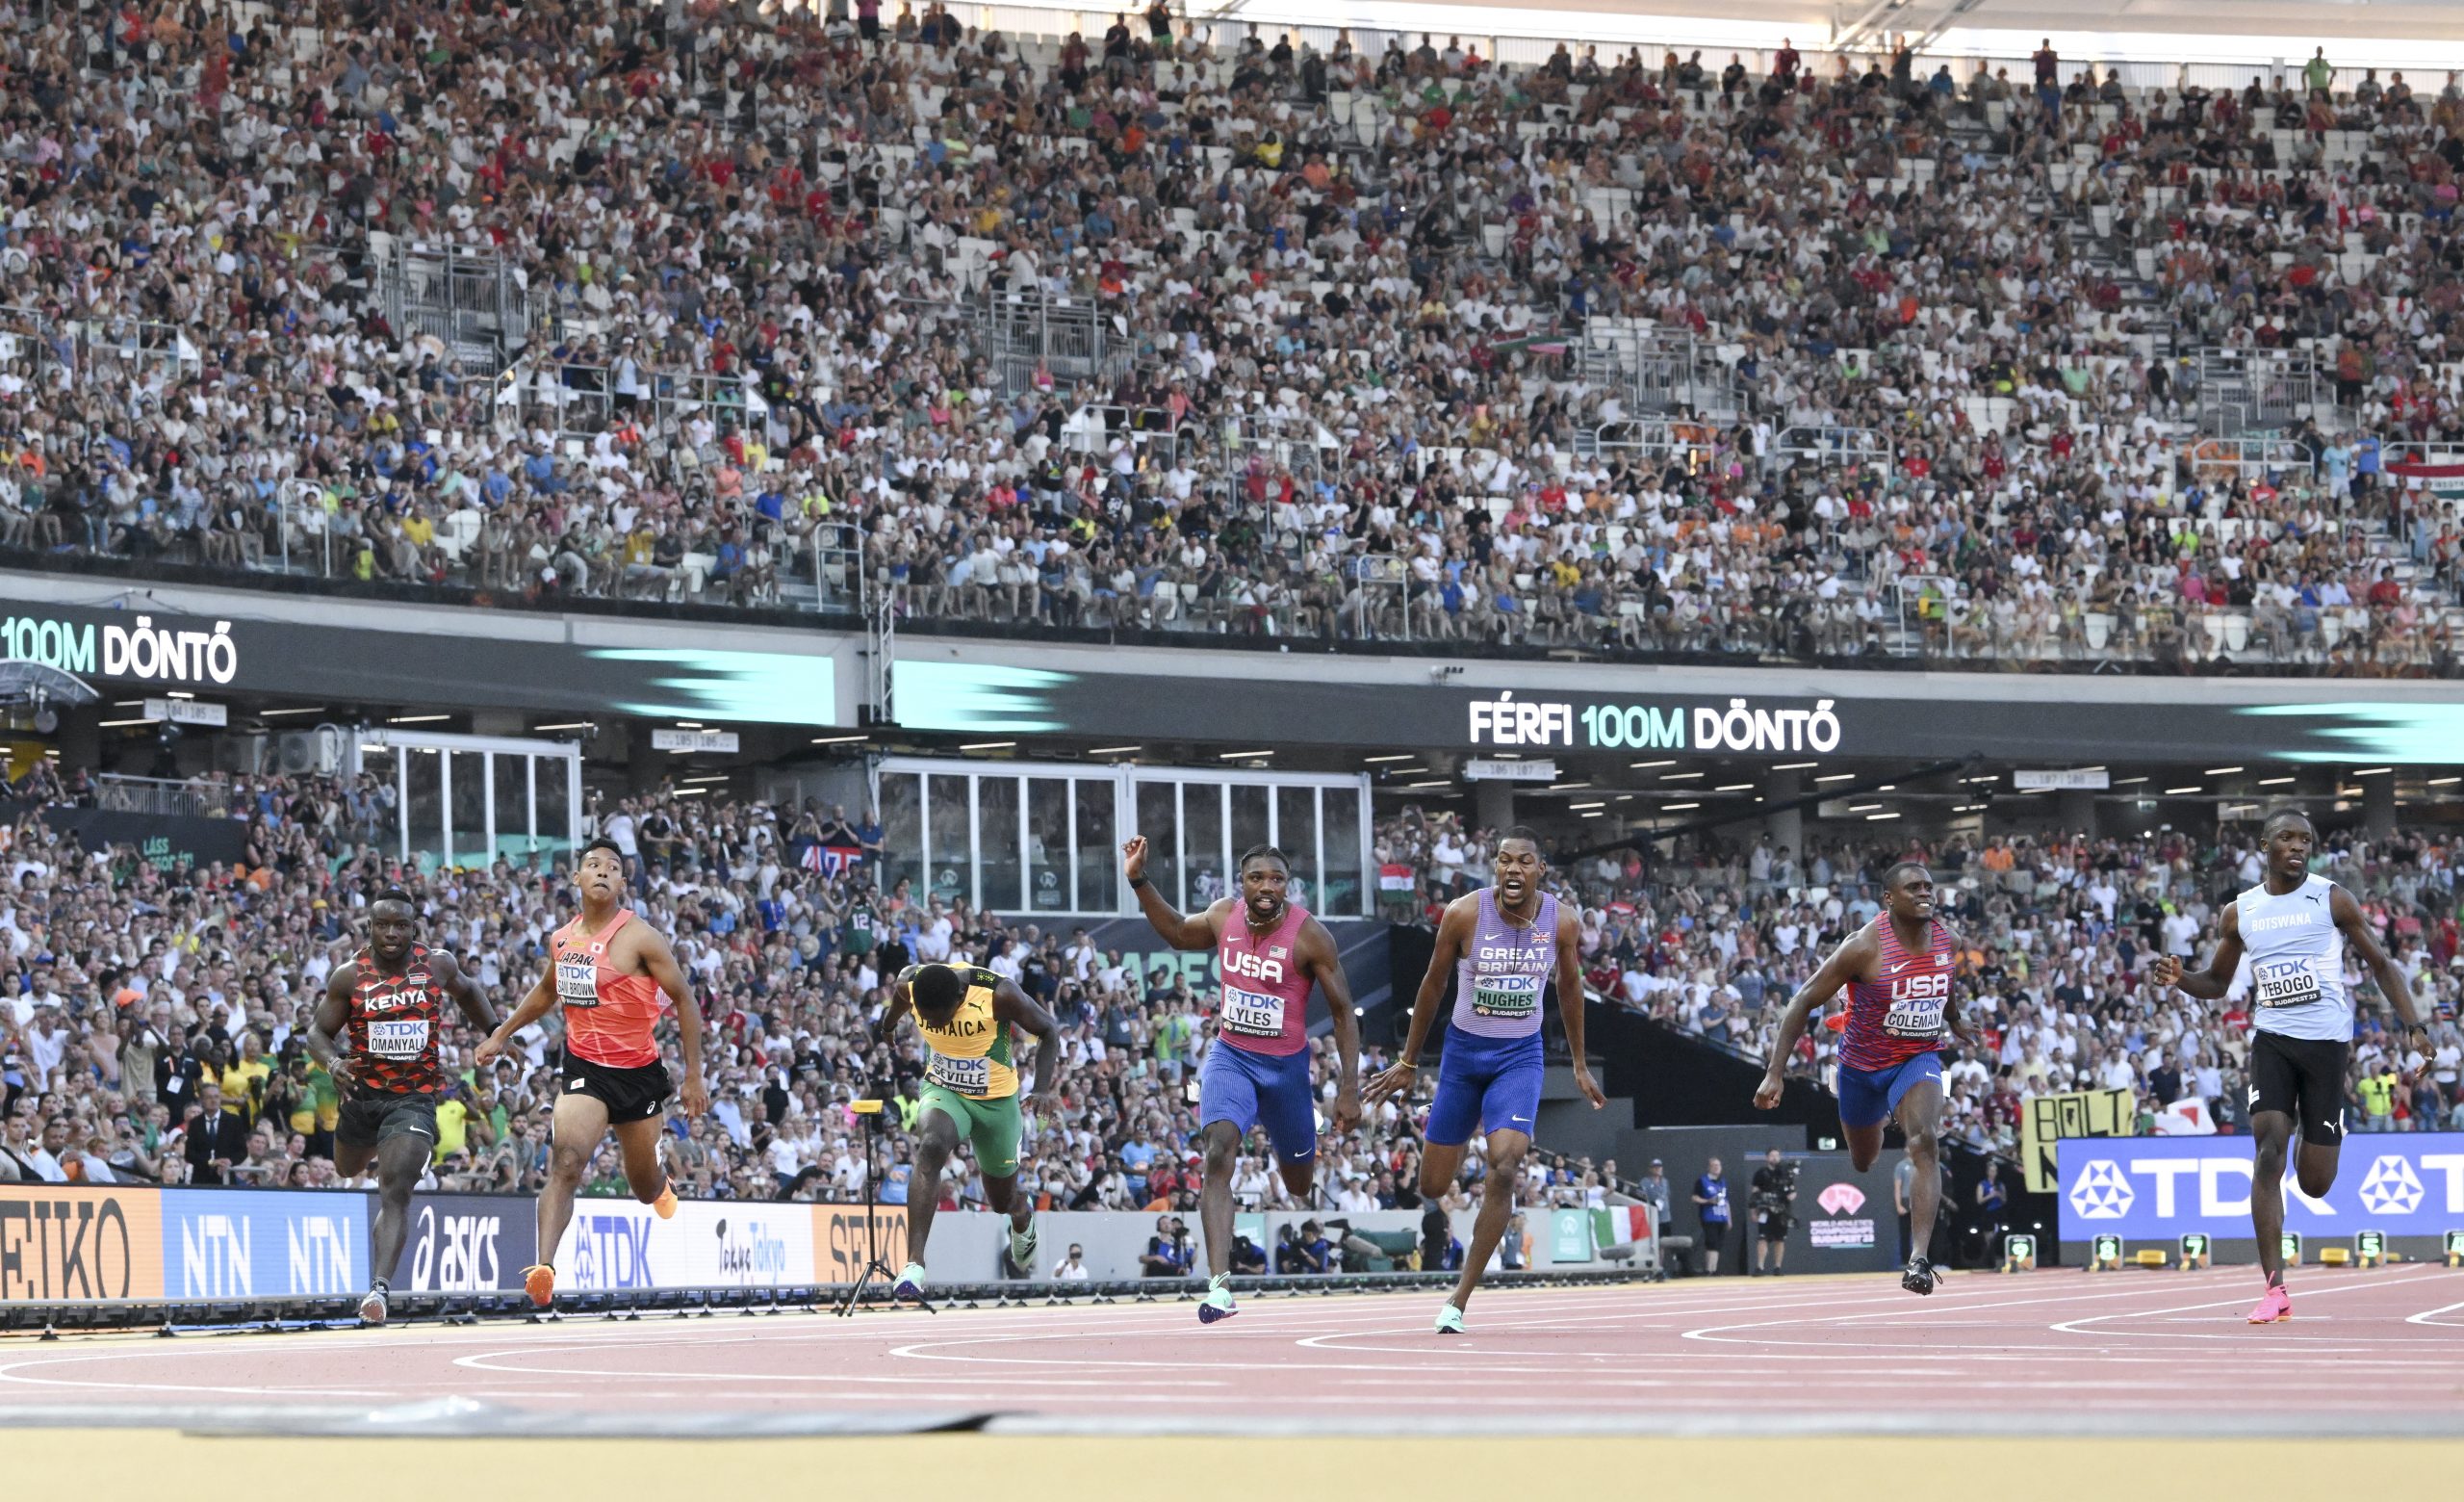 Tourism Boosted by National Holiday and World Athletics Championships